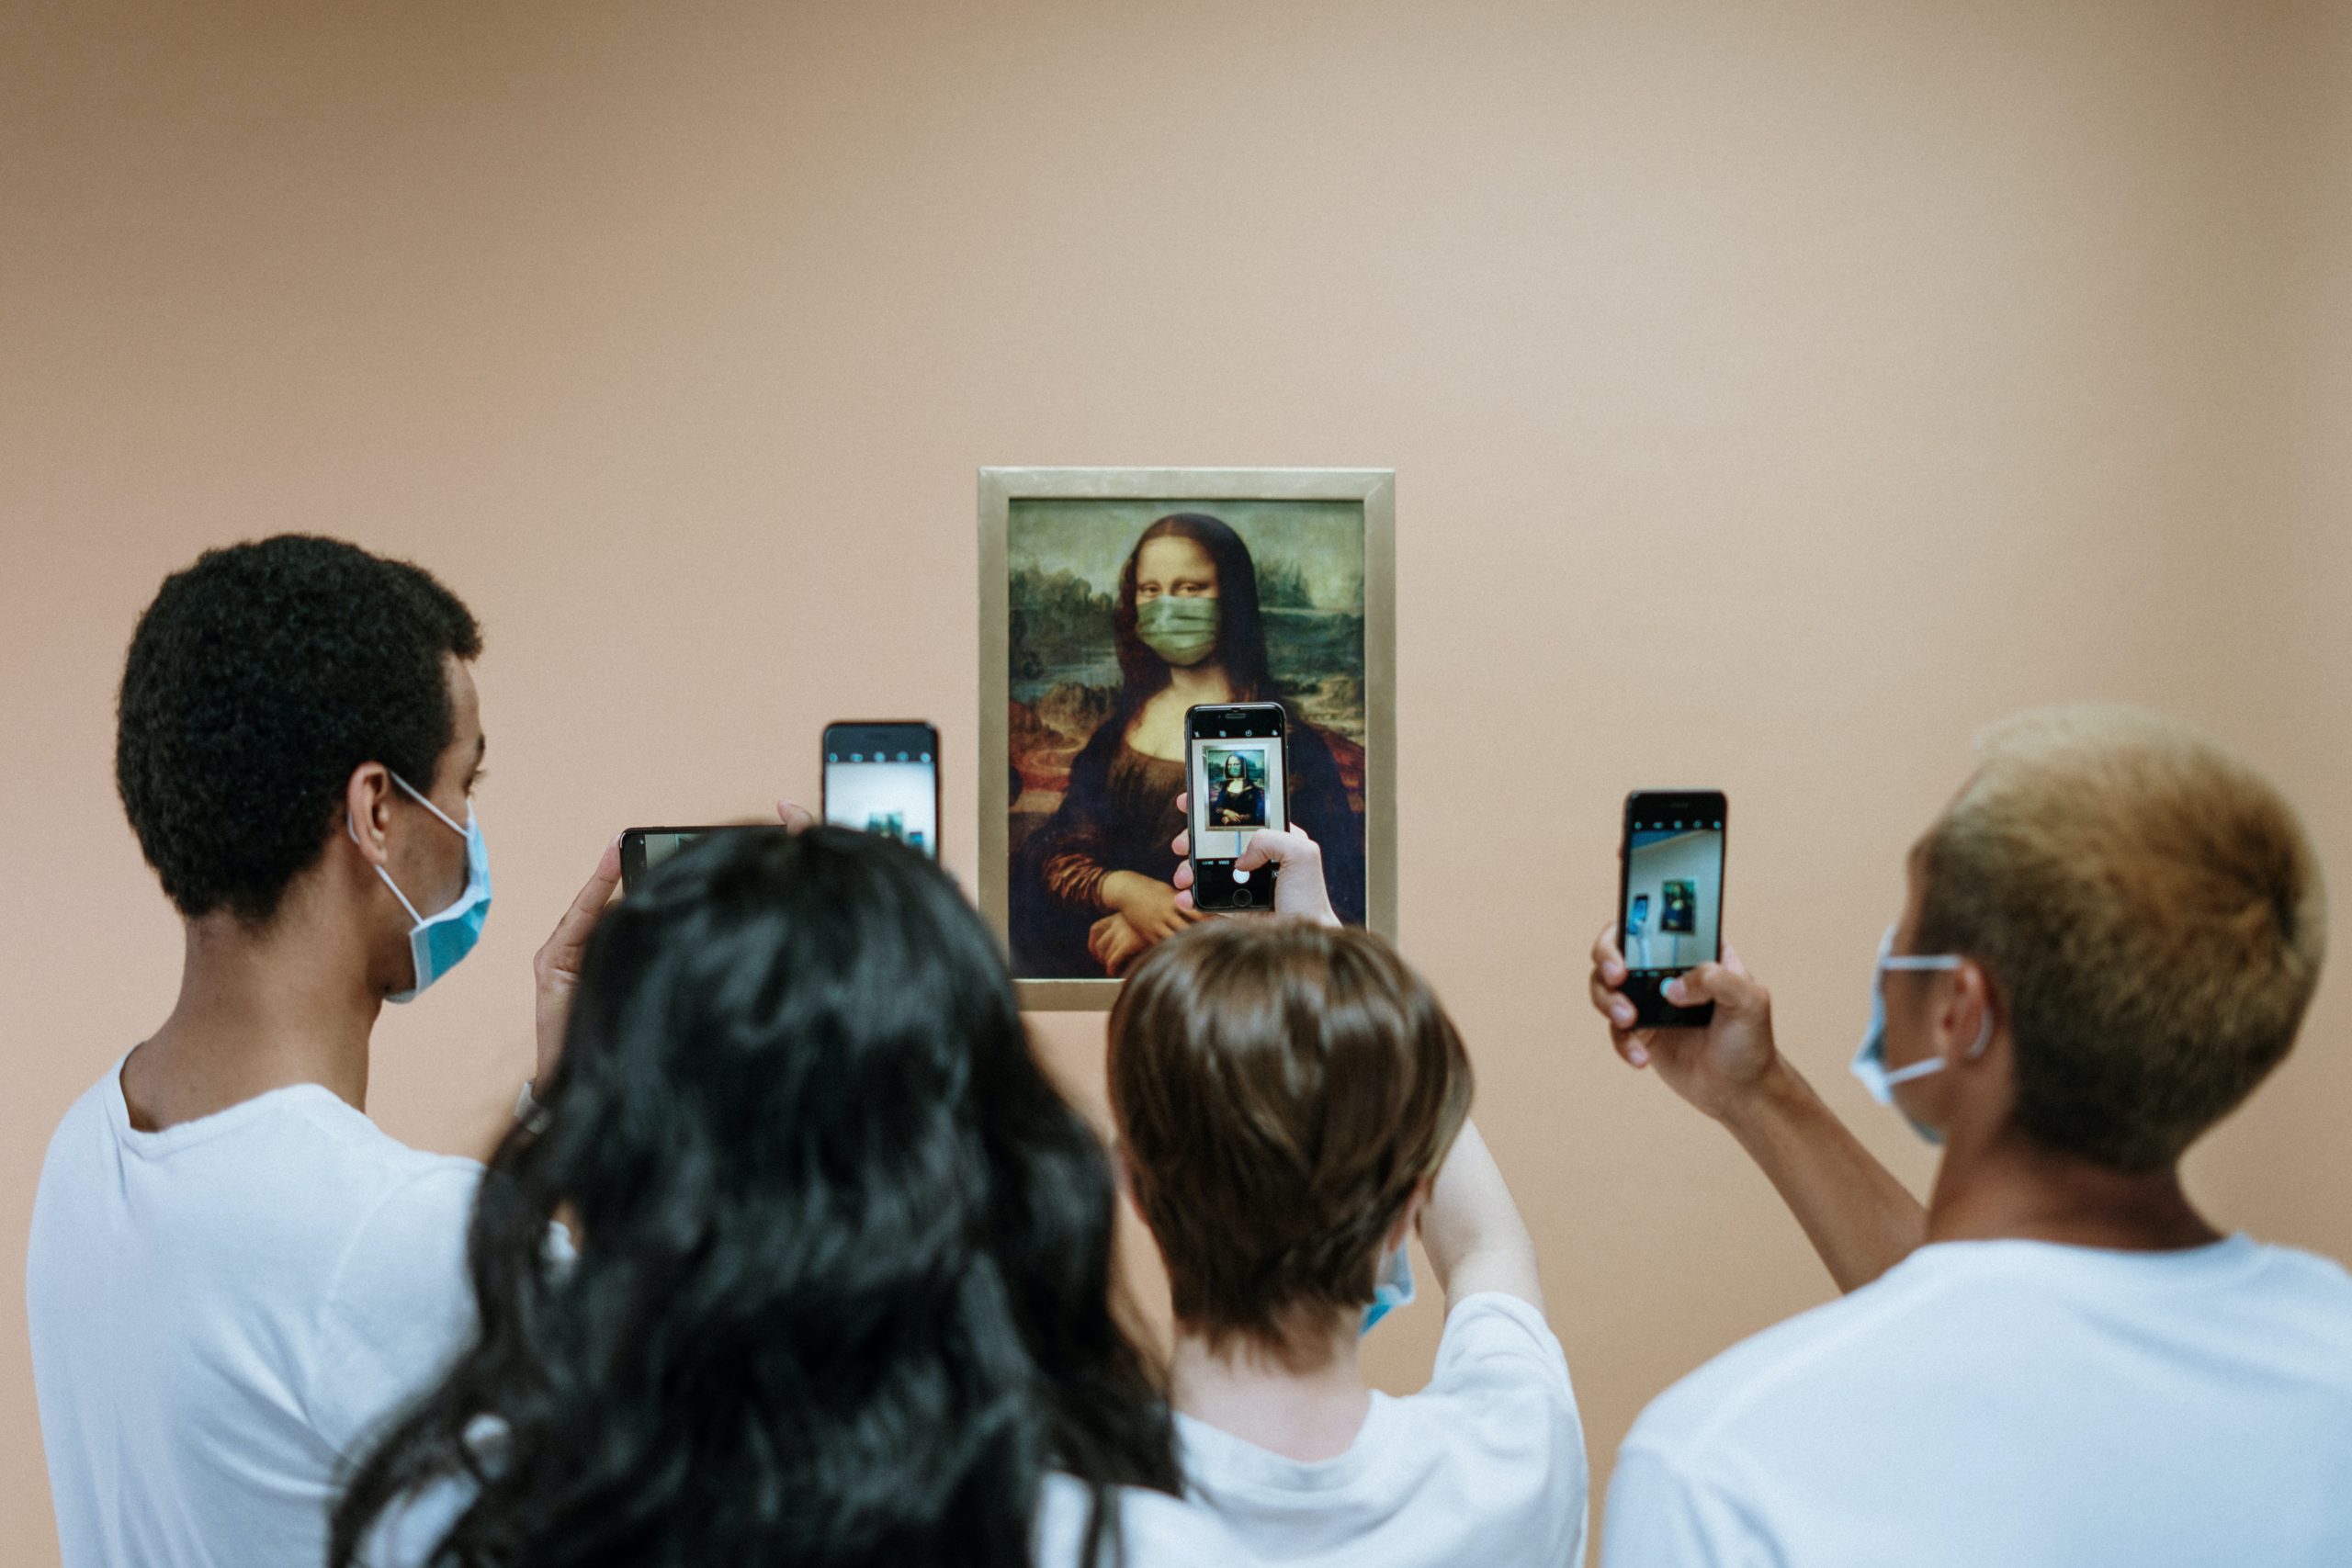 Engaging teenagers using interactive technology in museums